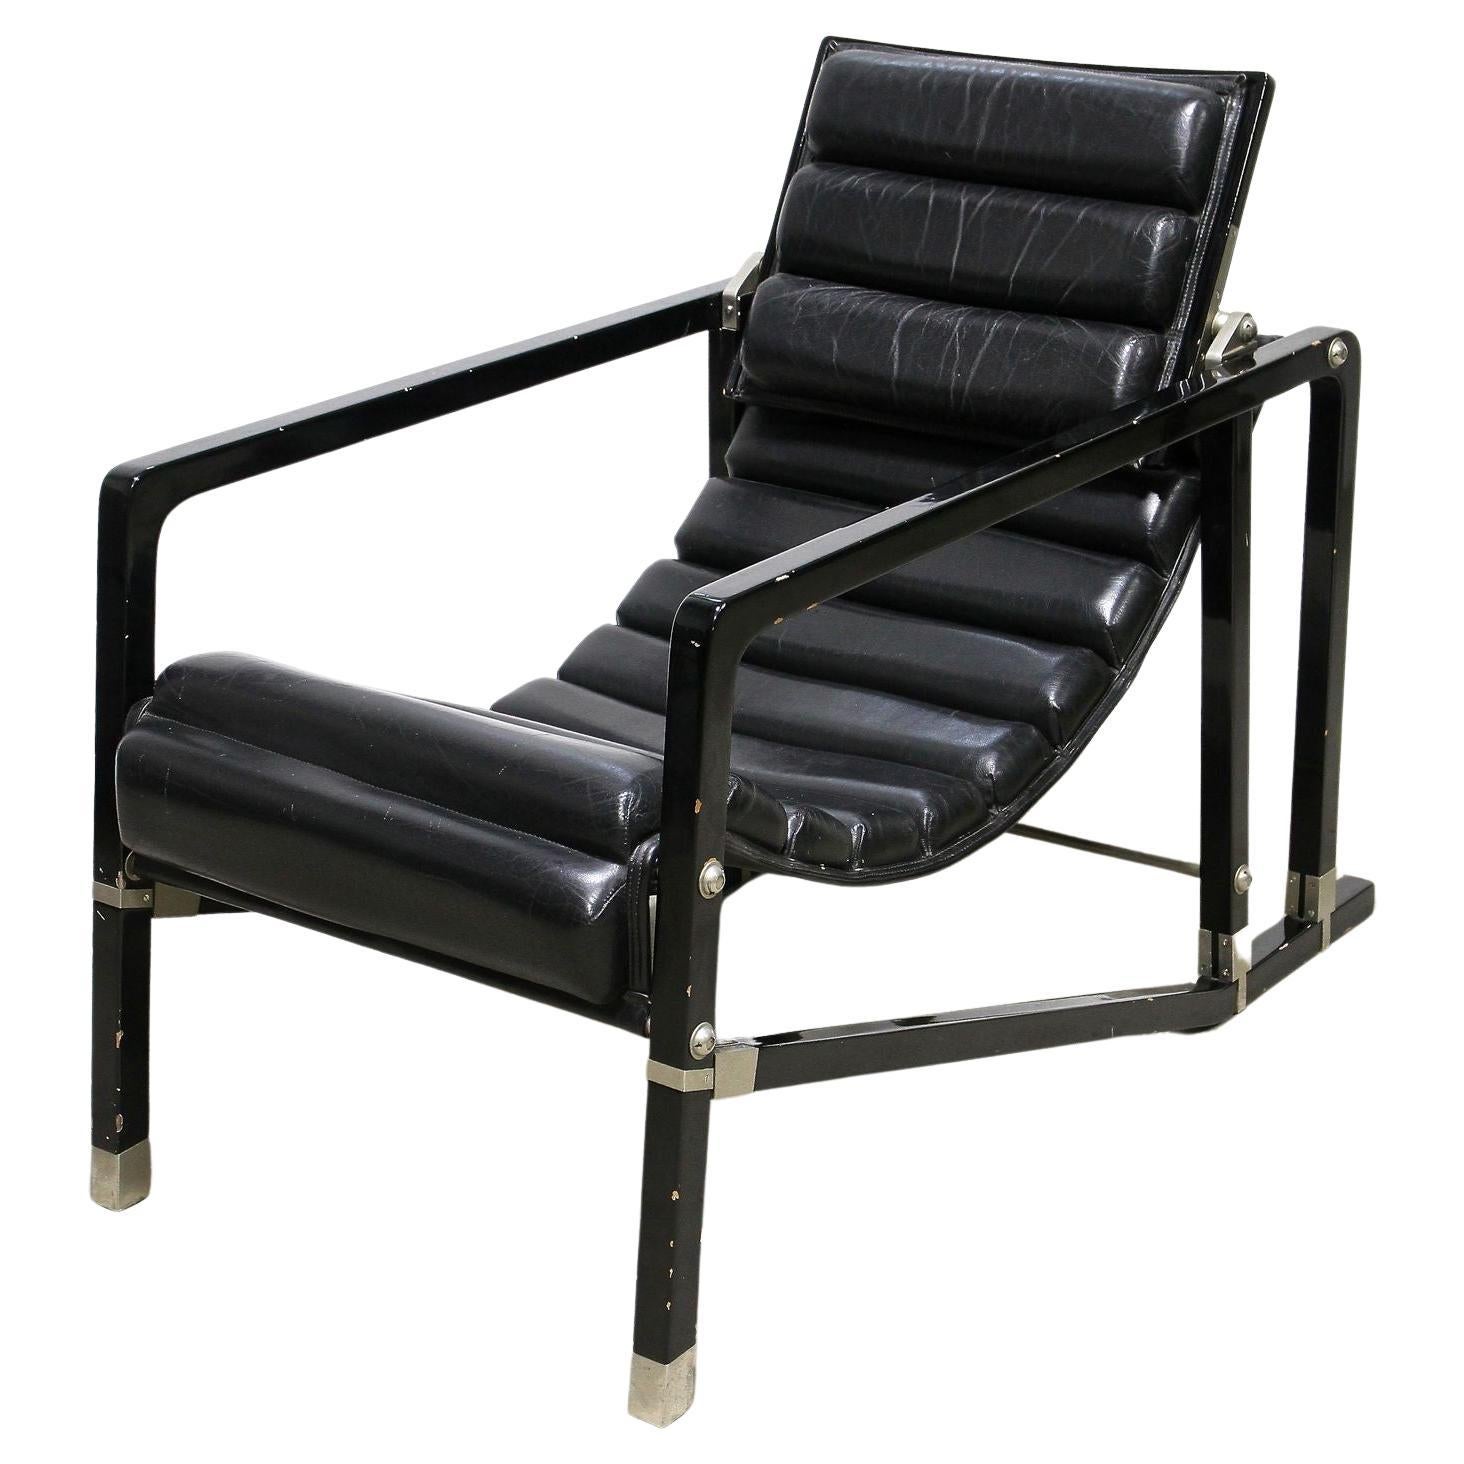 Transat Chair With Black Leather, Design Eileen Gray 1927, France ca. 1975